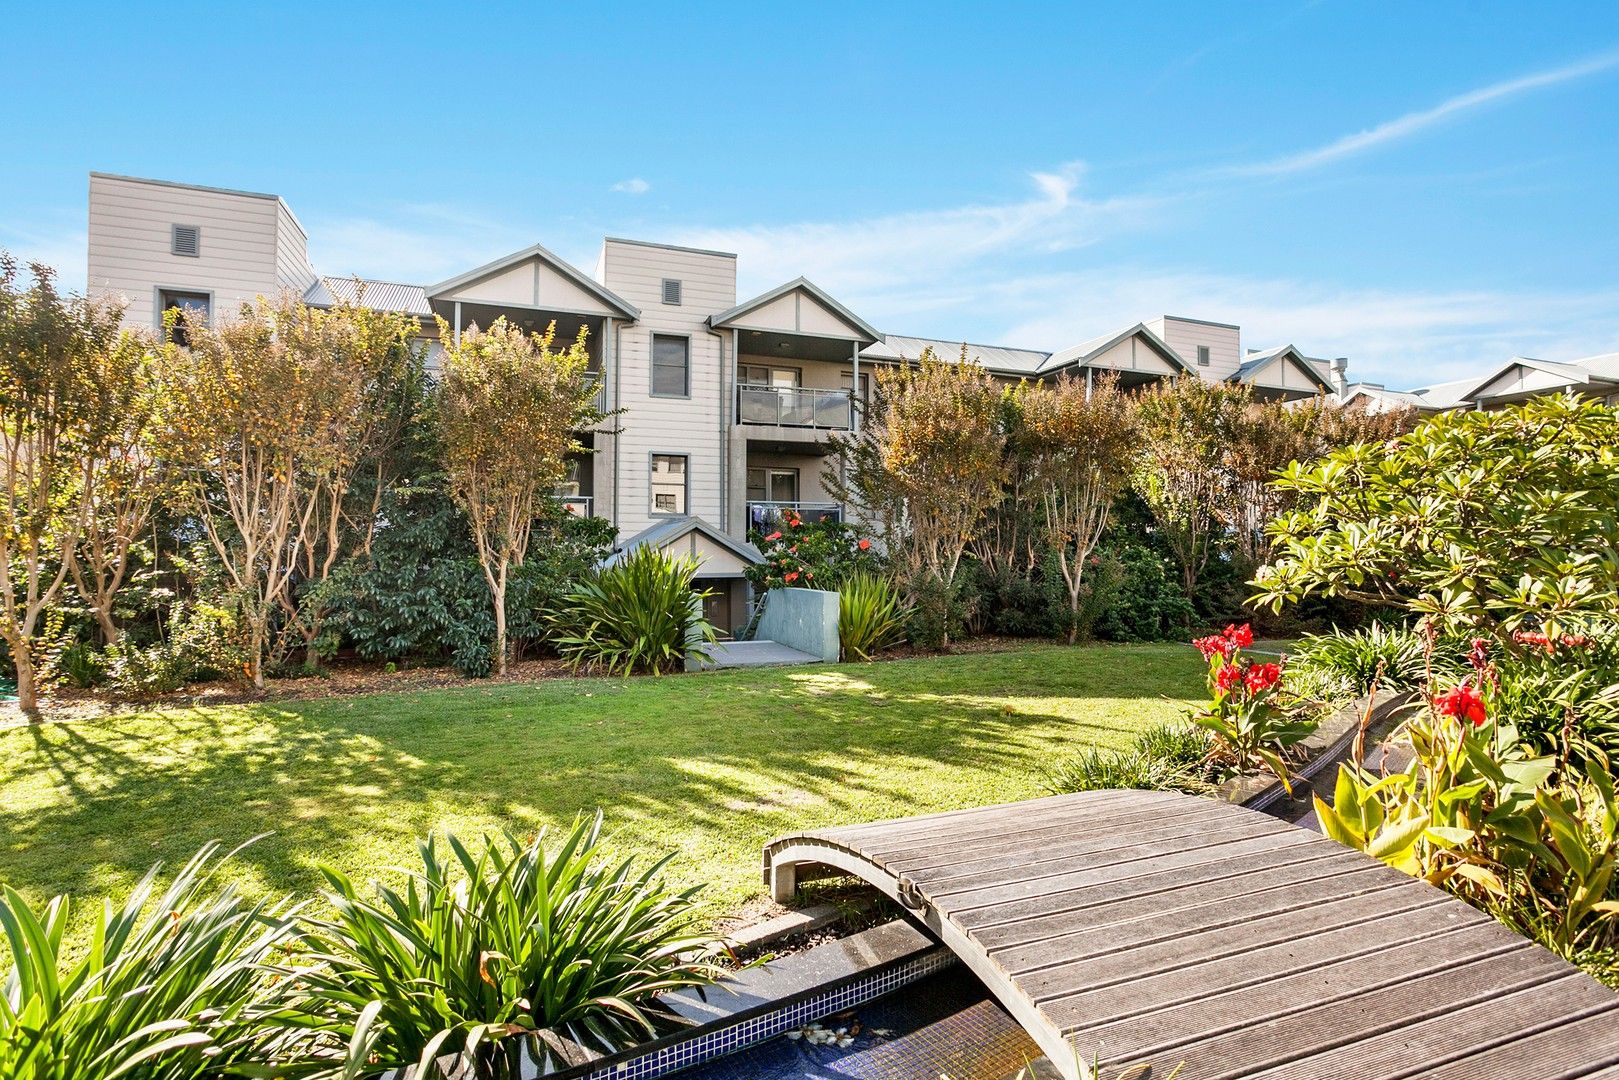 10/20-26 Addison Street, Shellharbour NSW 2529, Image 0